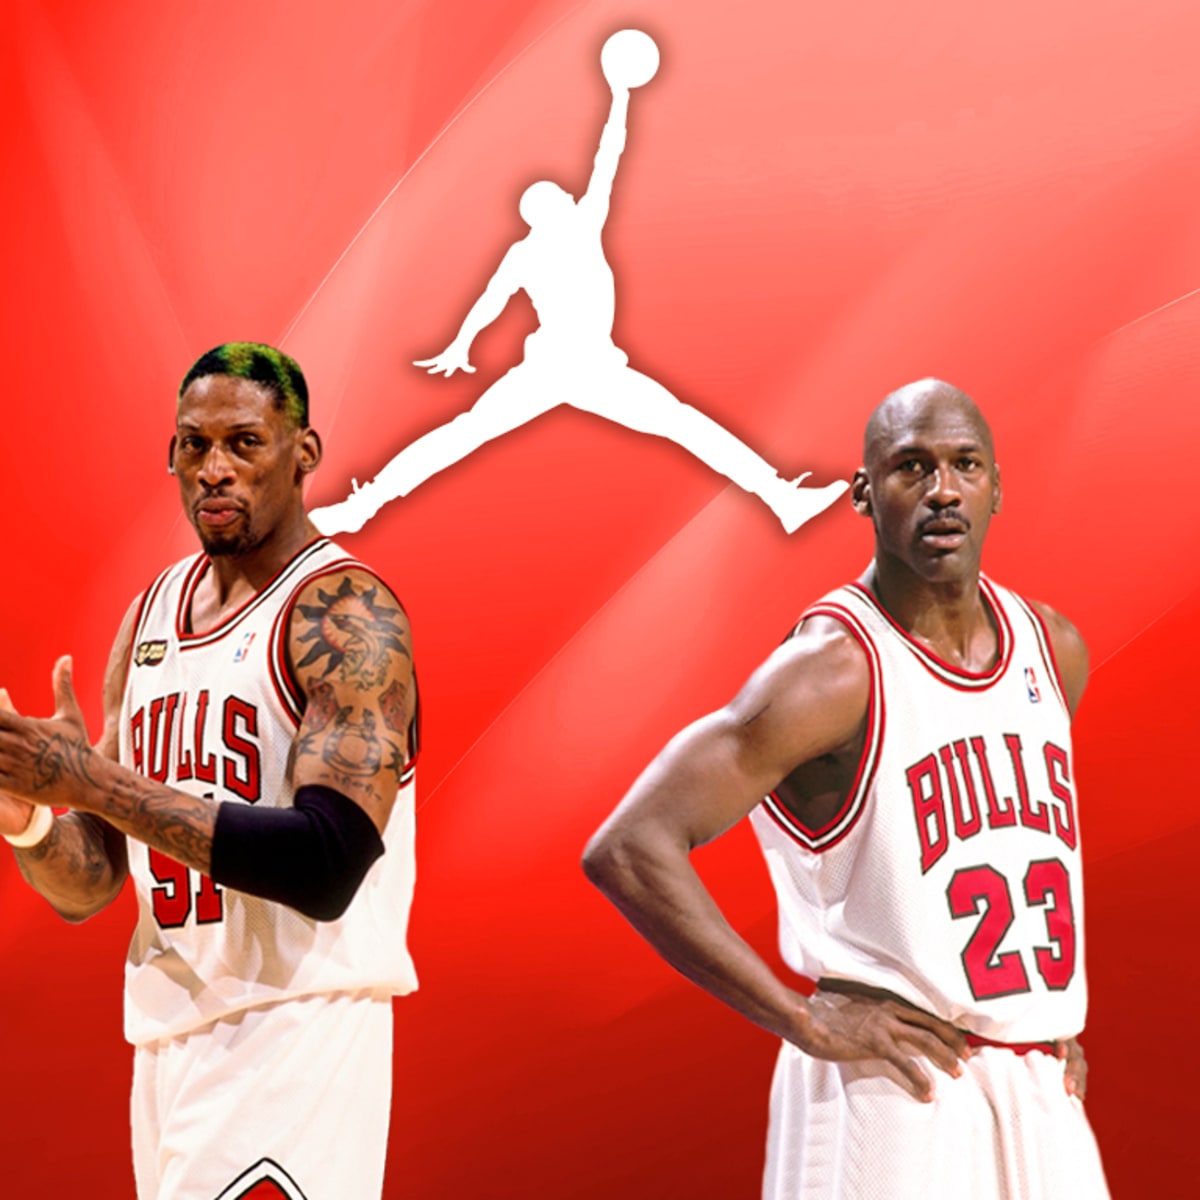 dennis rodman t-posing in the air like jordan. he is, Stable Diffusion